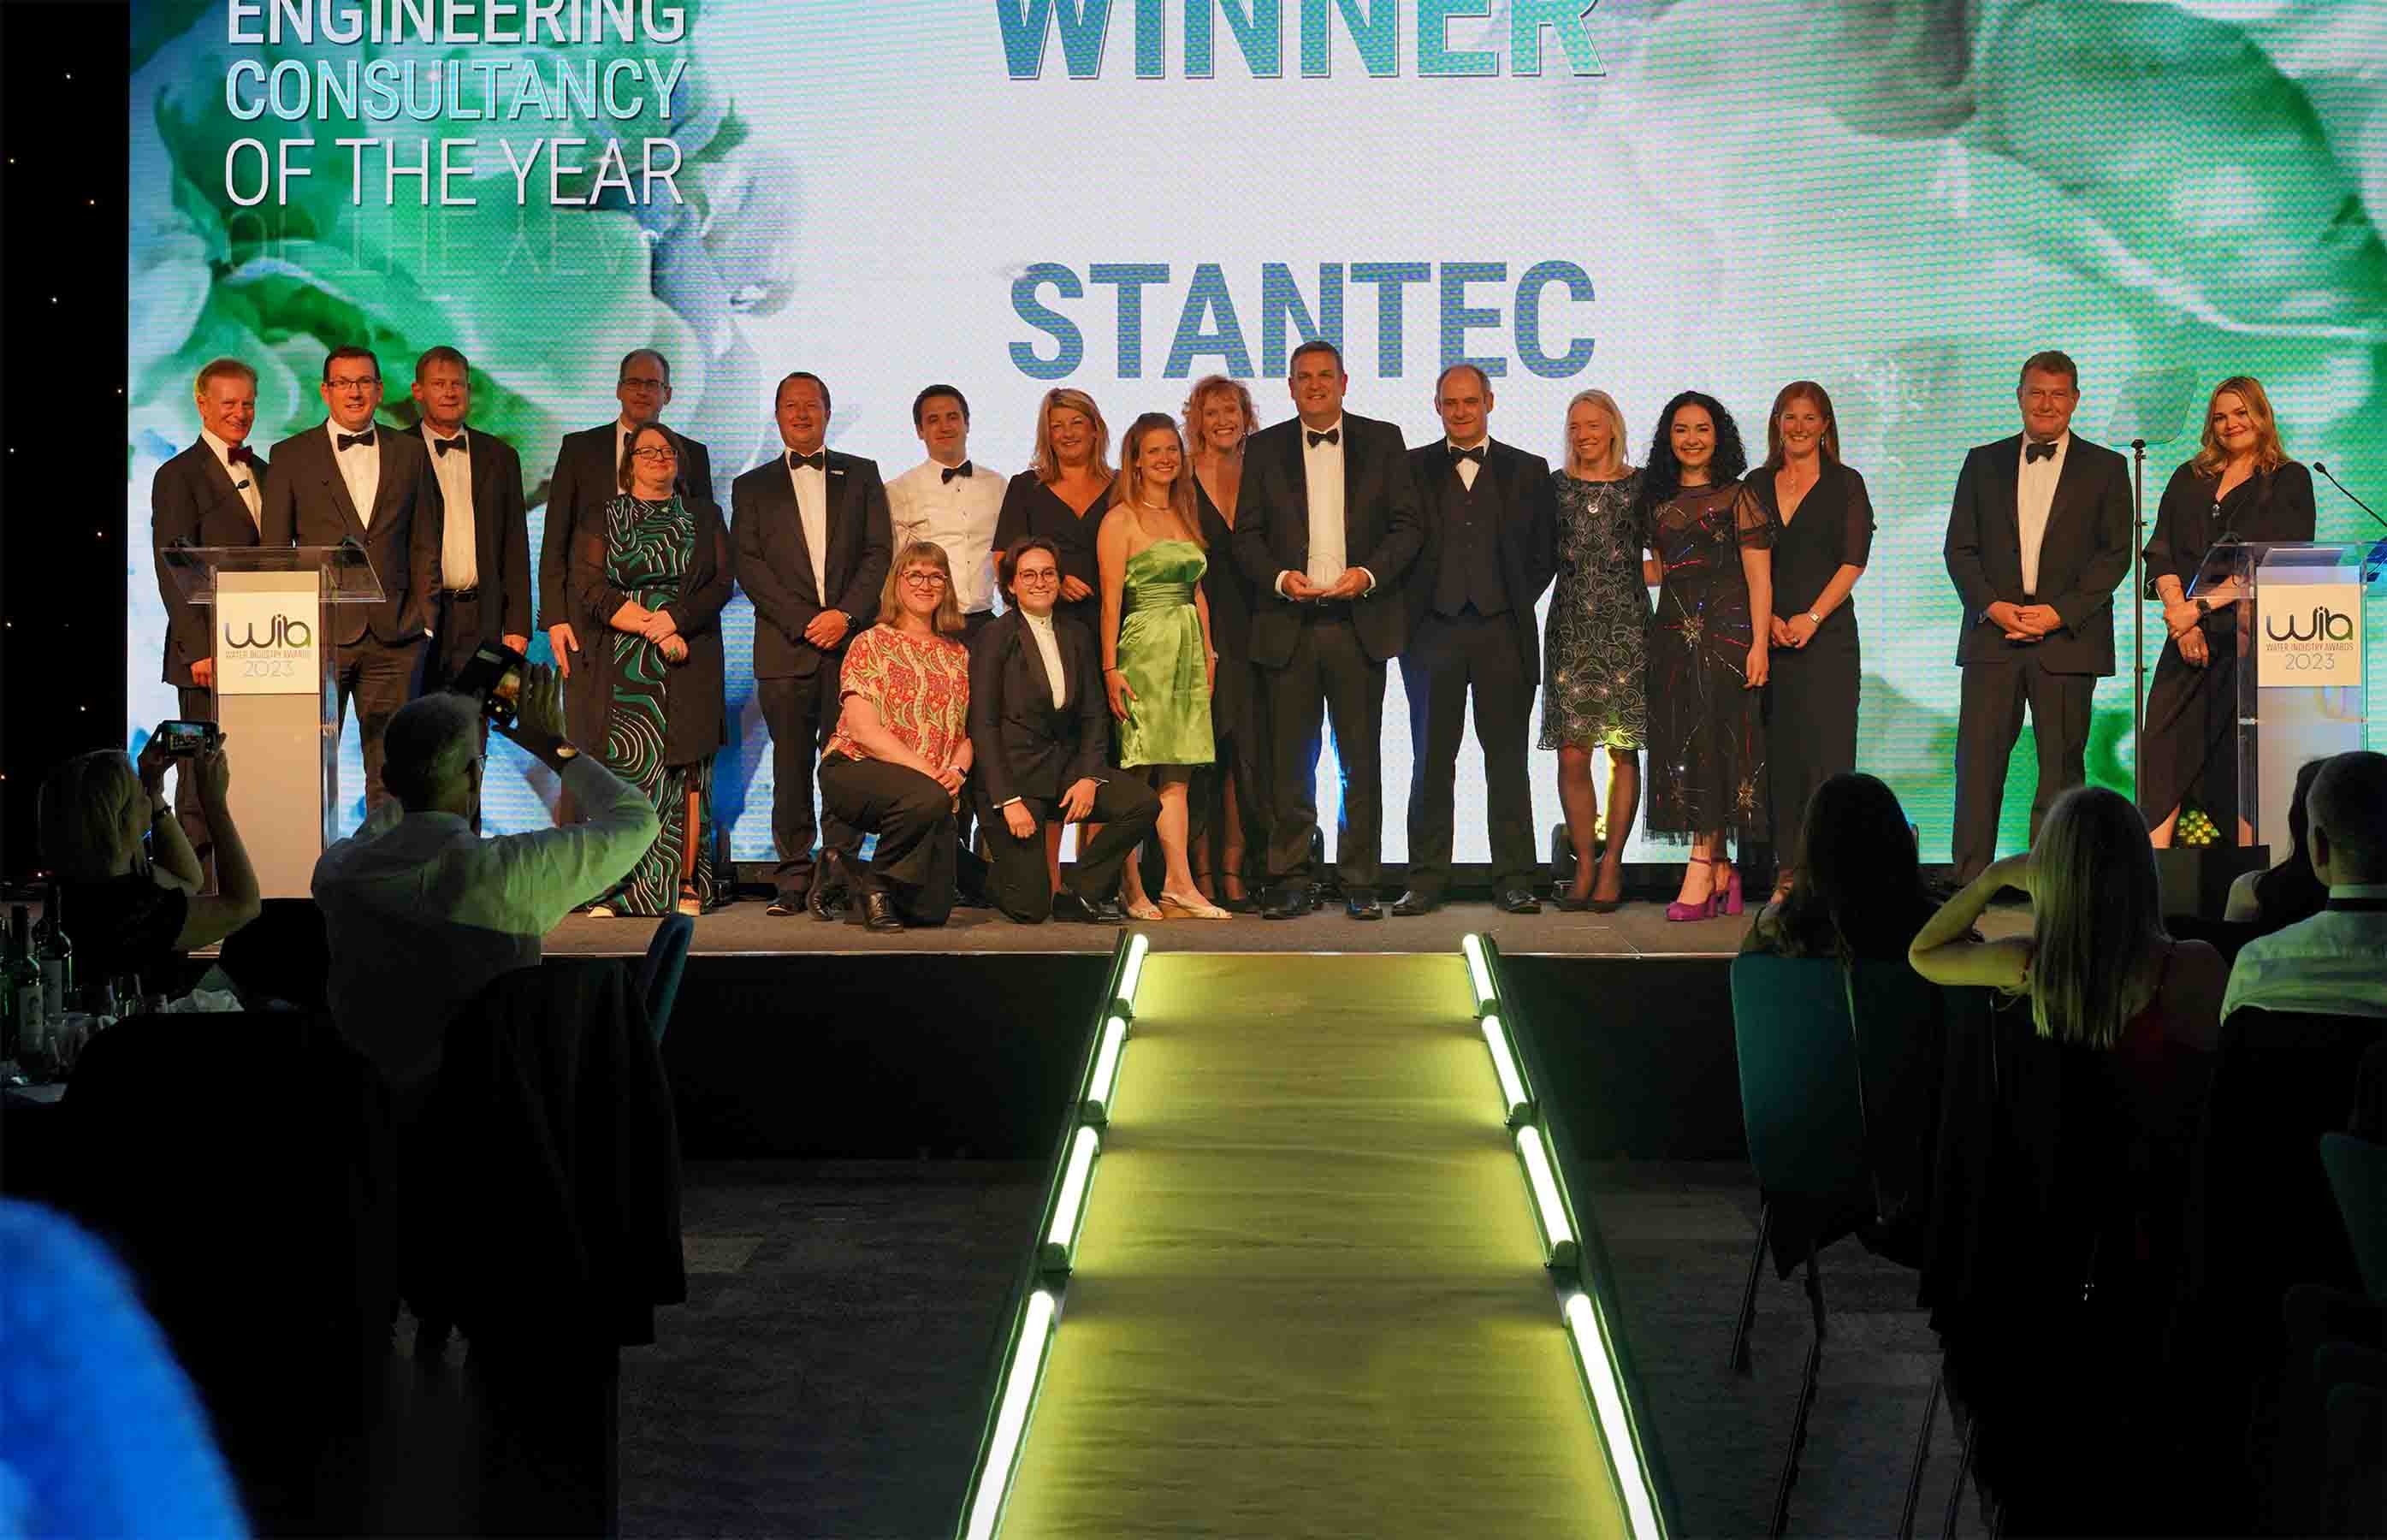 Stantec named ‘Engineering Consultancy of the Year’ at Water Industry Awards